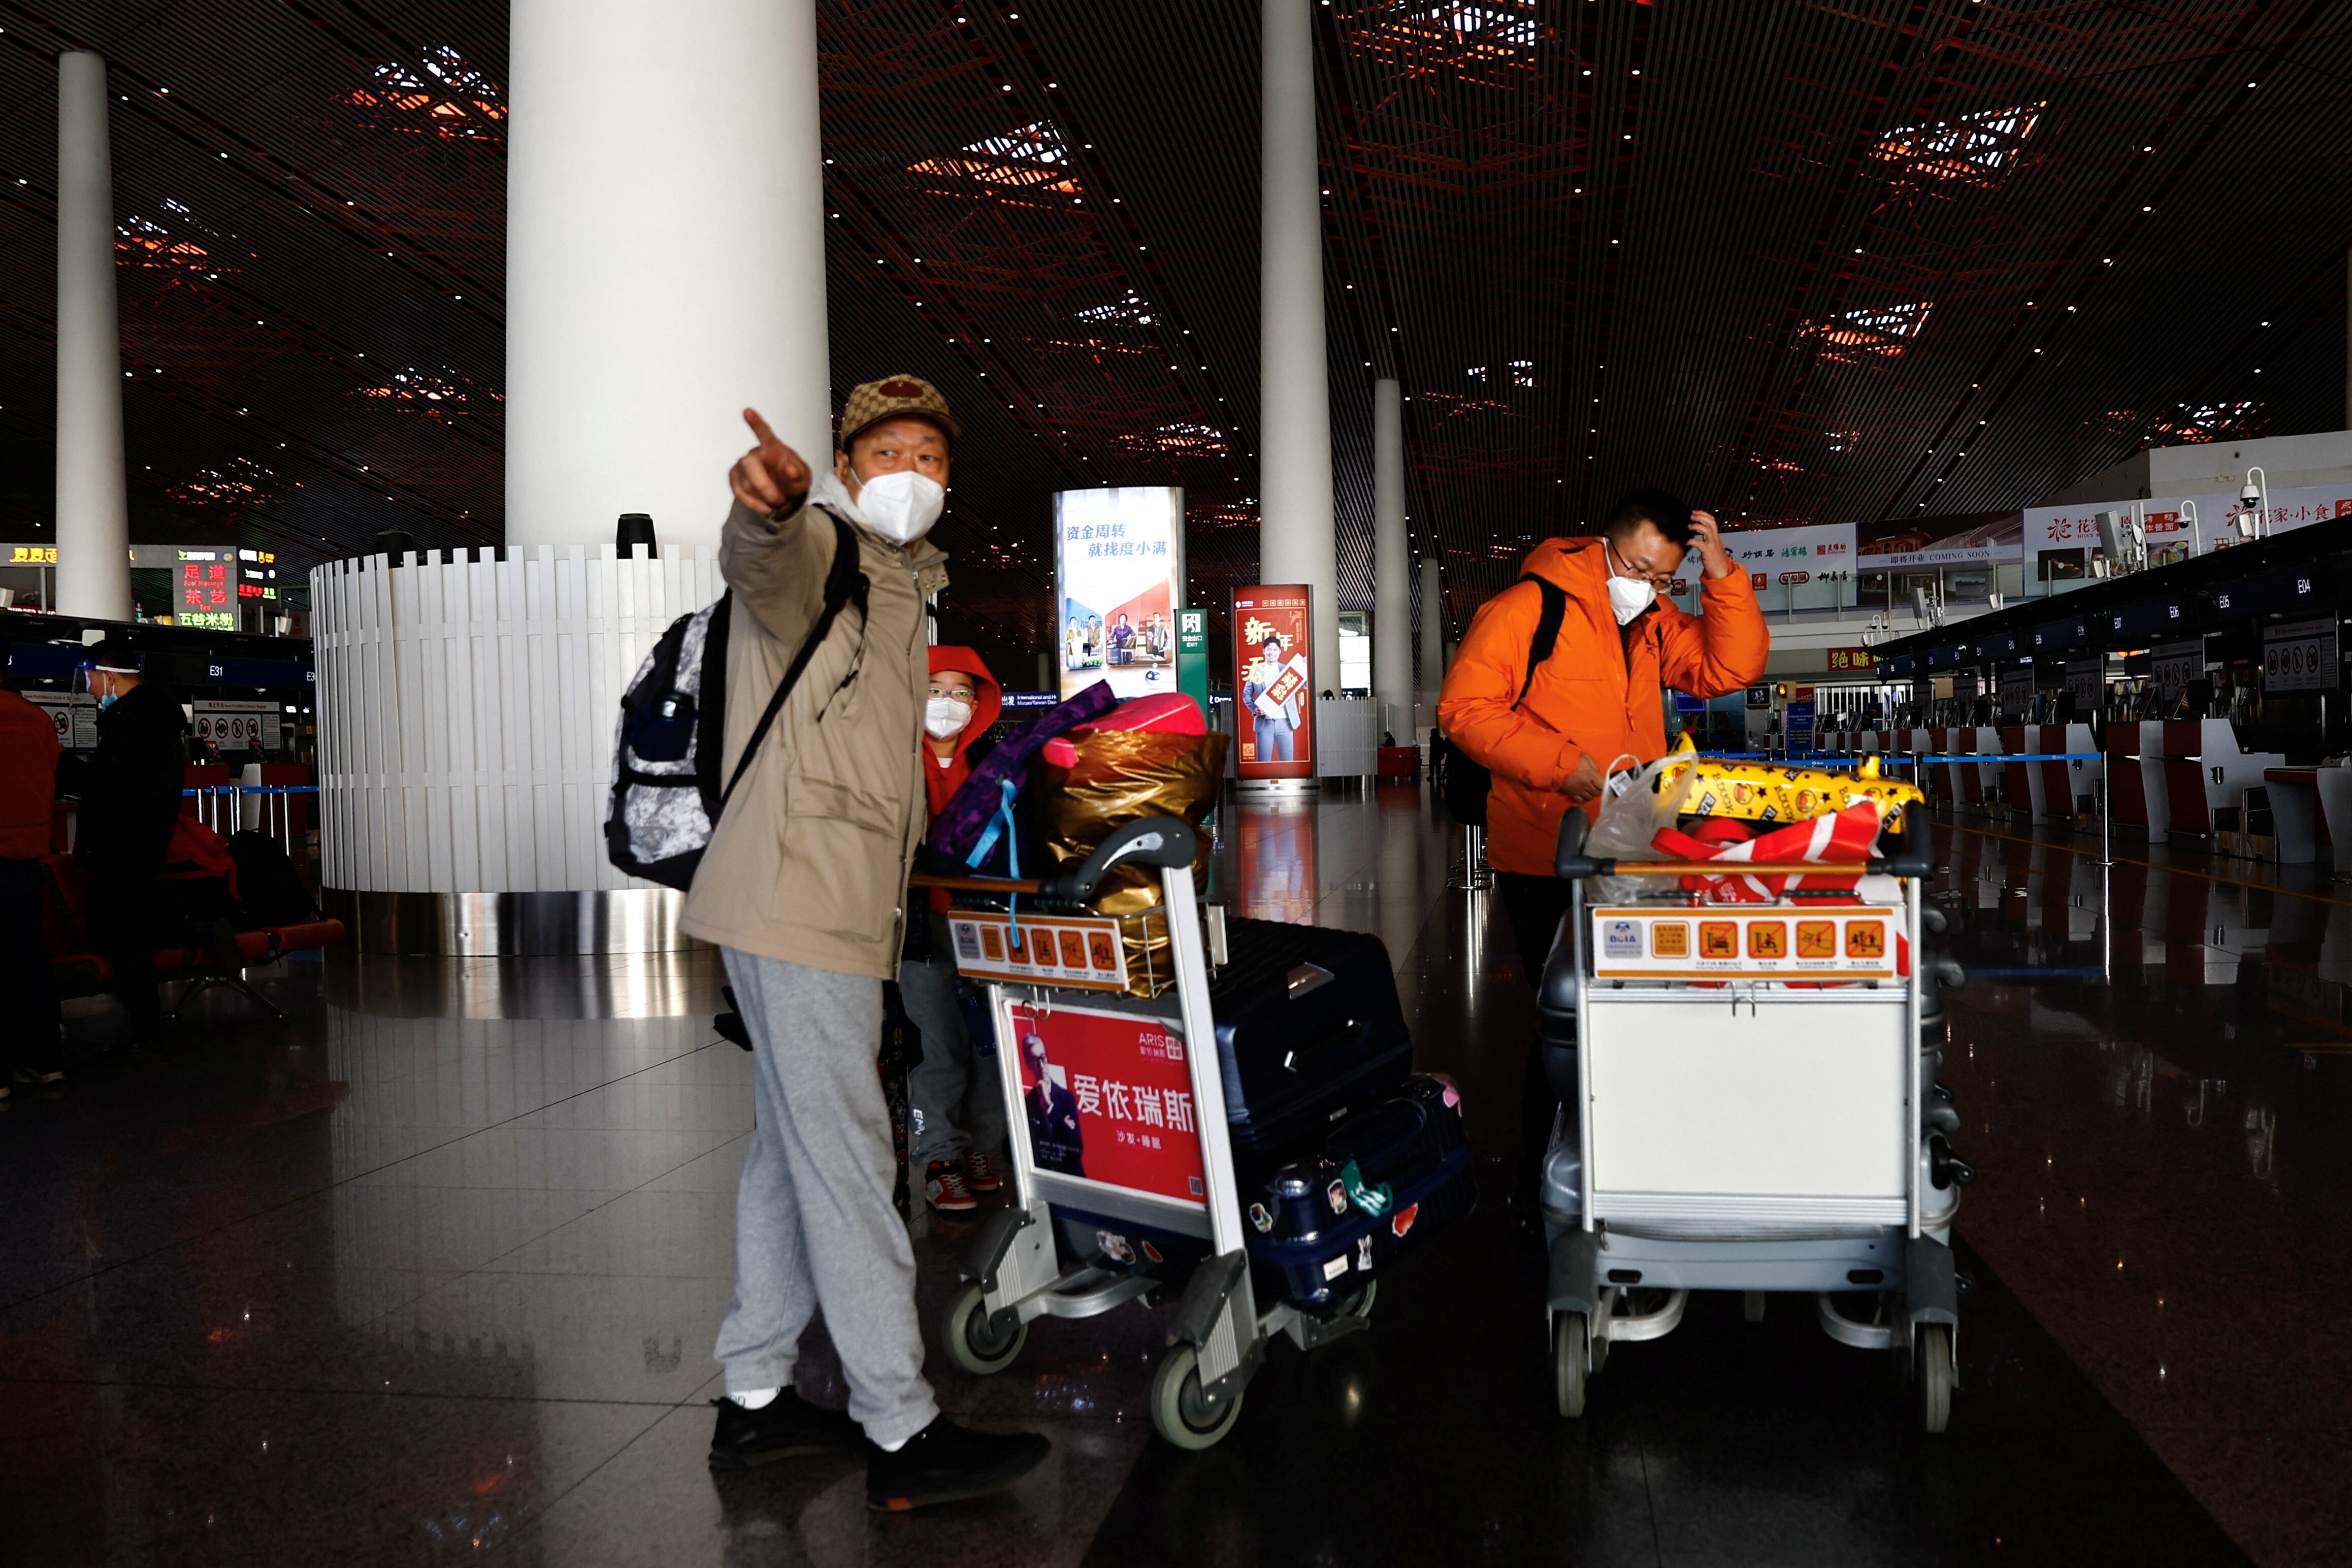 Two people wearing face masks at Beijing airport